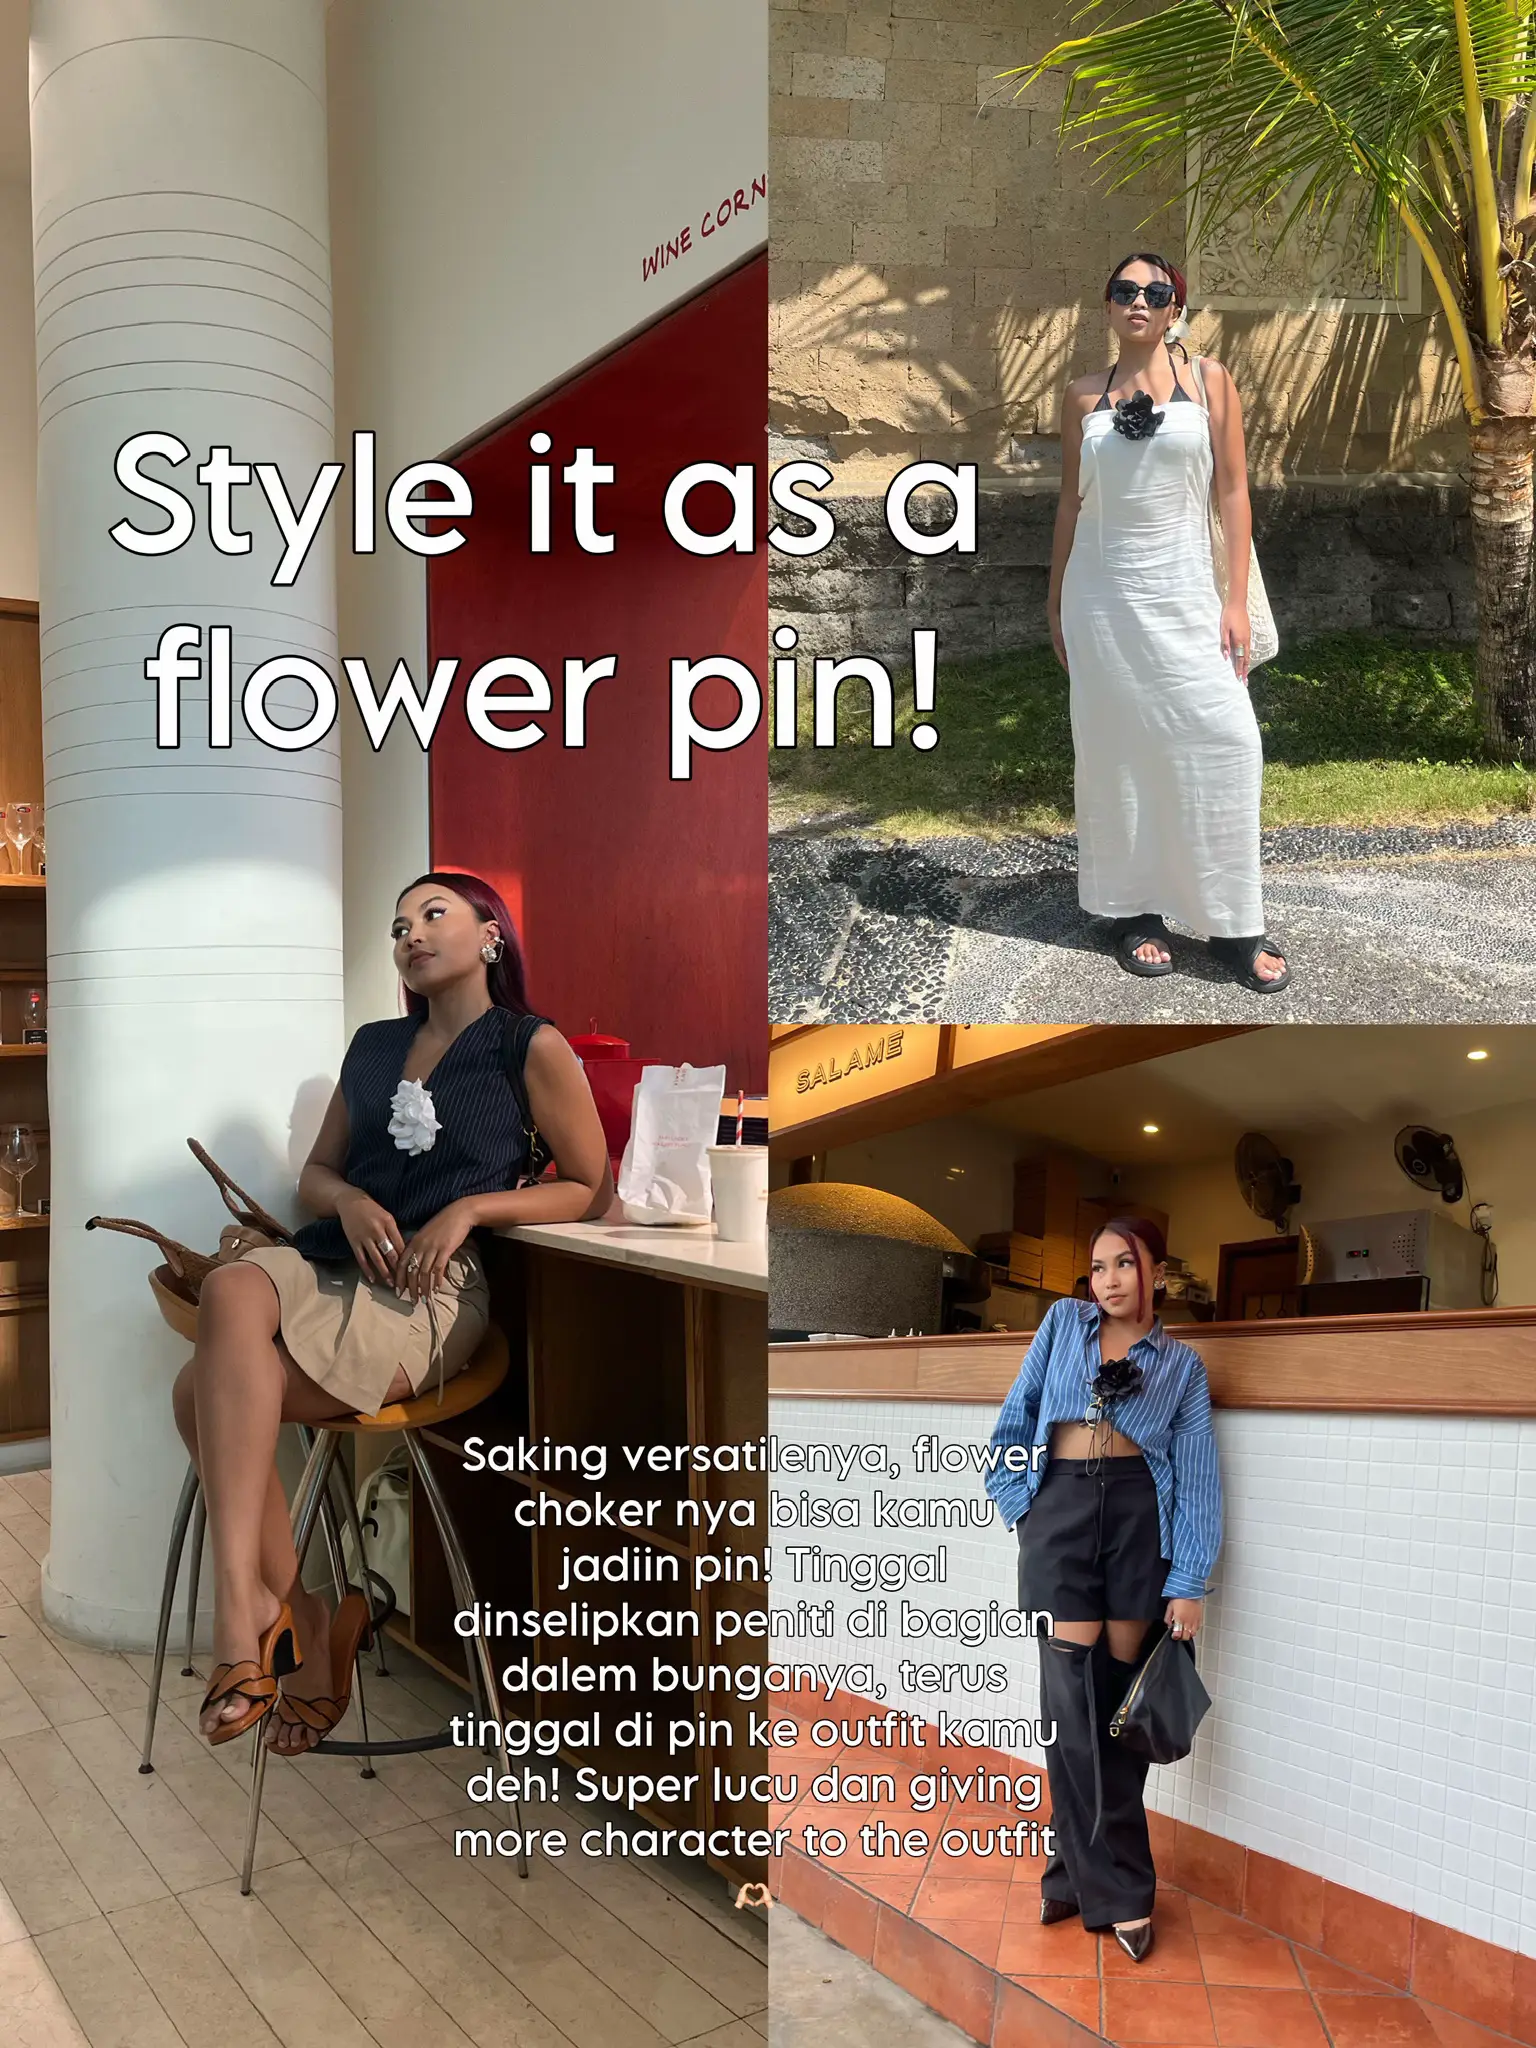 Pin on Style It